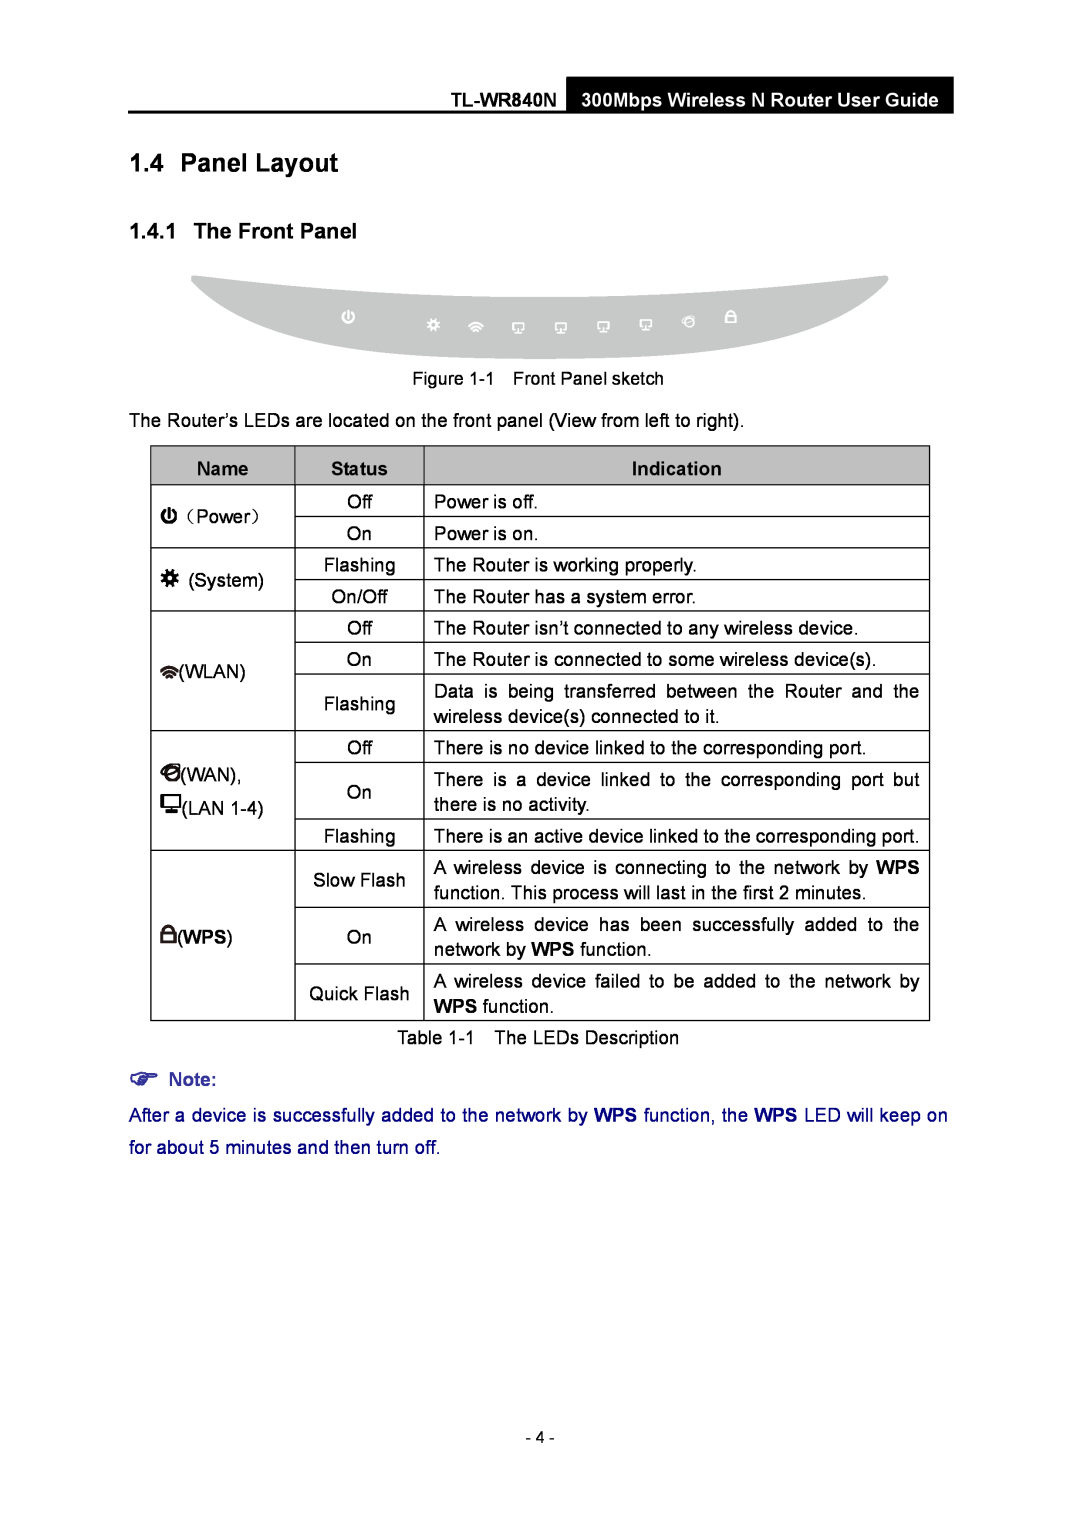 TP-Link manual Panel Layout, The Front Panel, Name, Status, Indication, TL-WR840N 300Mbps Wireless N Router User Guide 